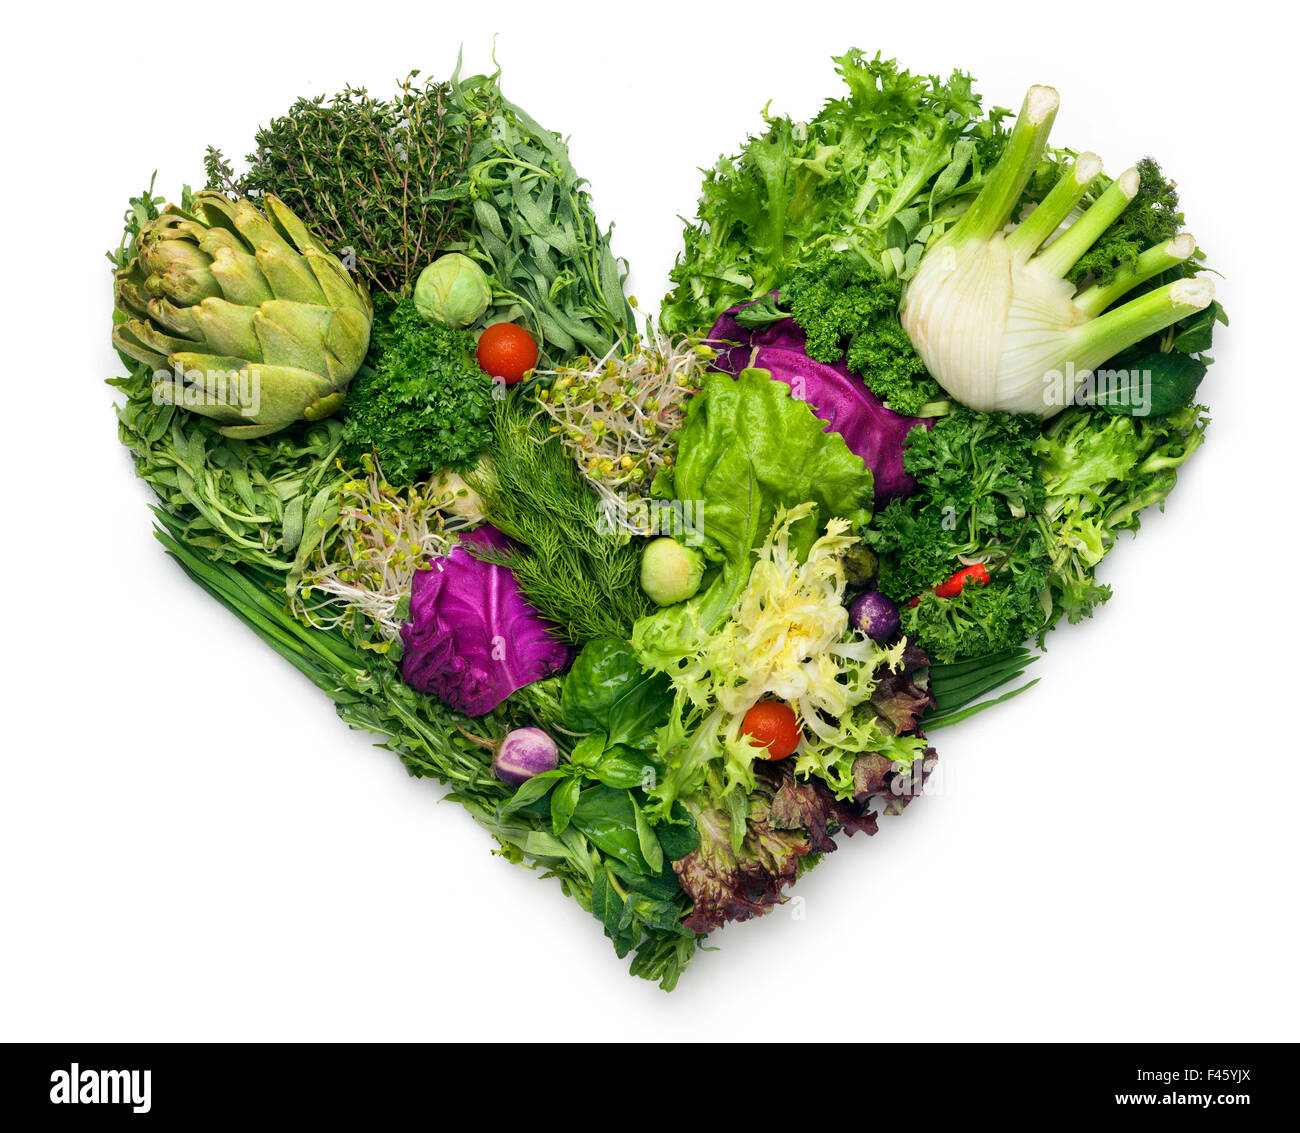 From nature with love. Stock Photo